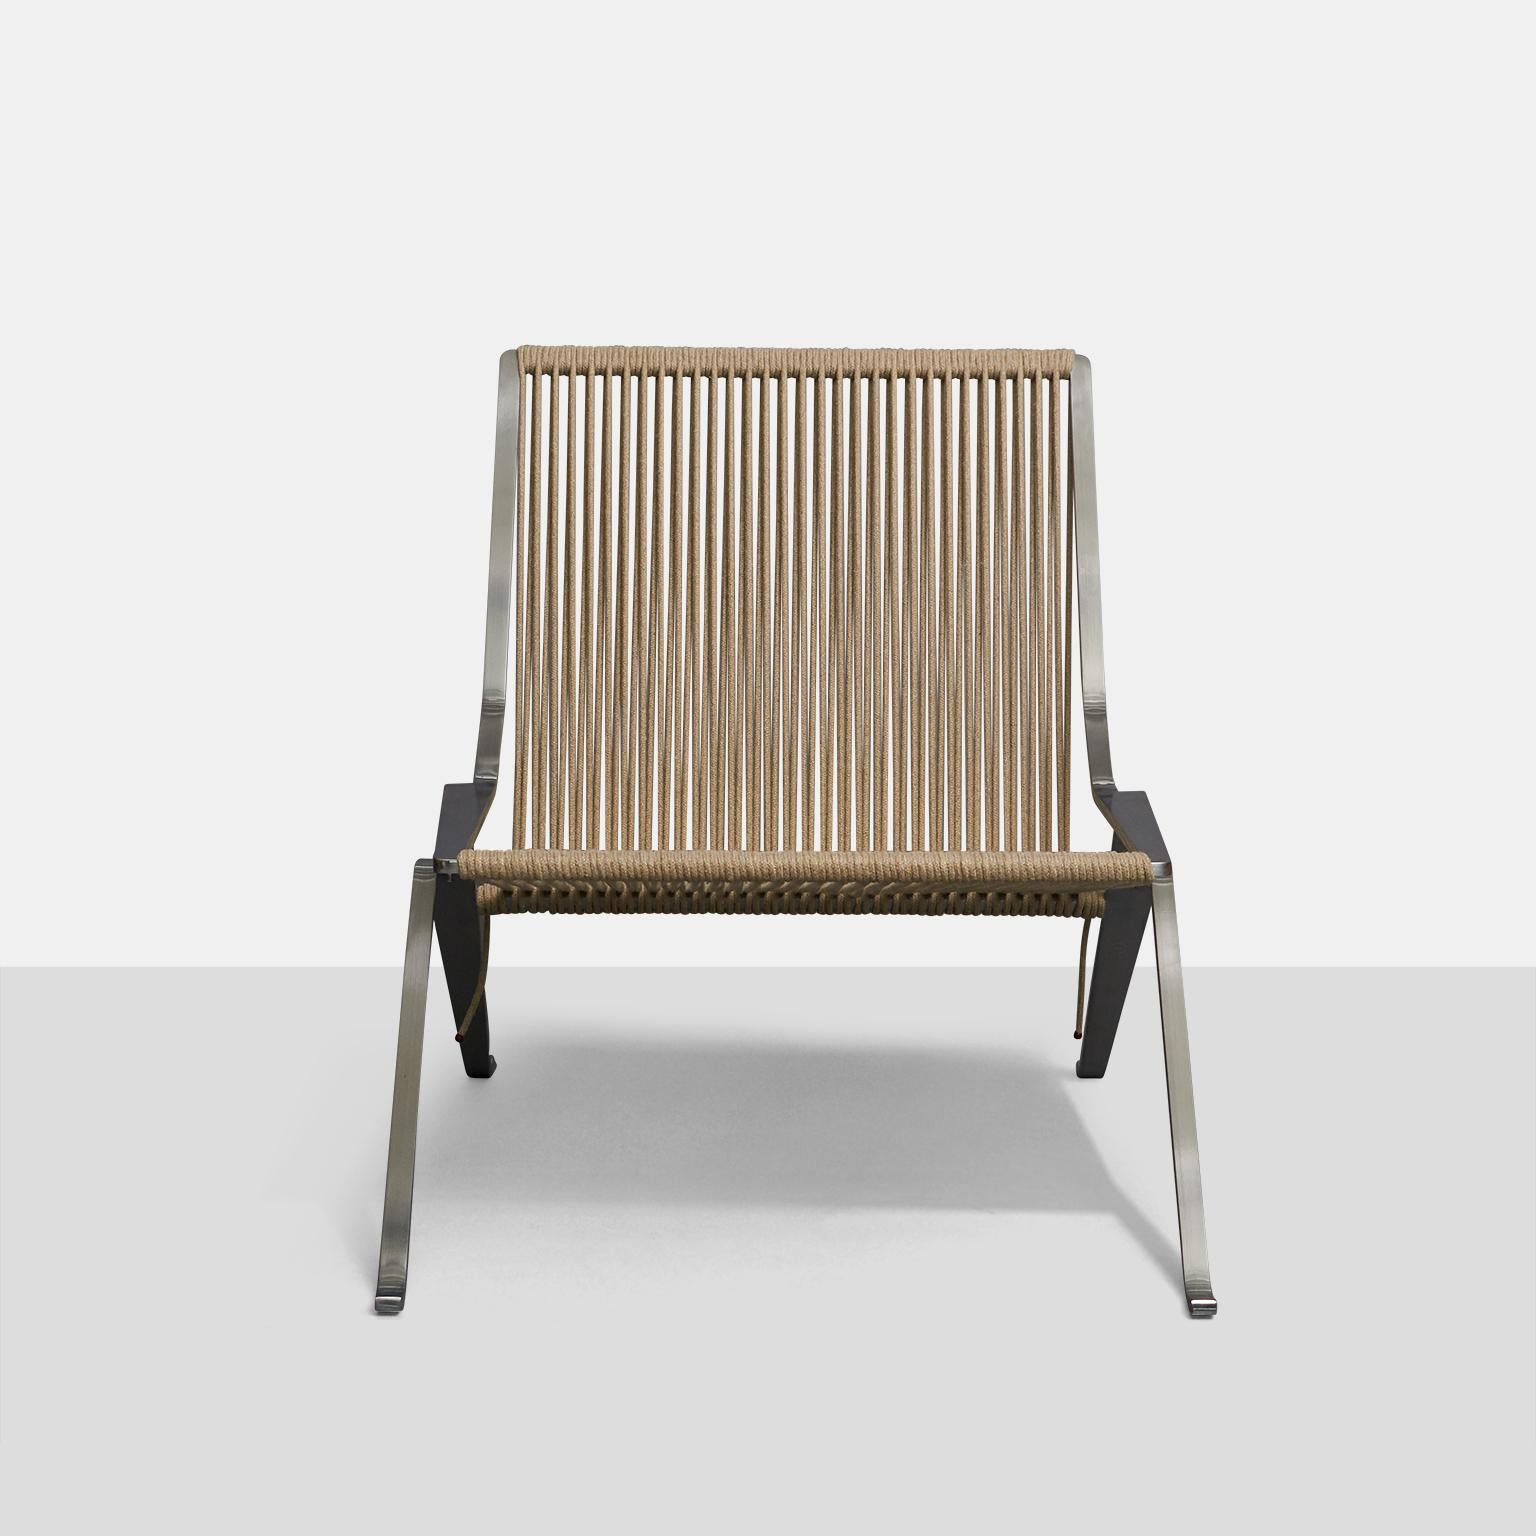 A PK-25 lounge chair with matt chromed spring steel frame made using a single piece of steel, mounted with woven flag halyard. Designed in 1951. Produced by Fritz Hansen, stamped accordingly on the frame.
  